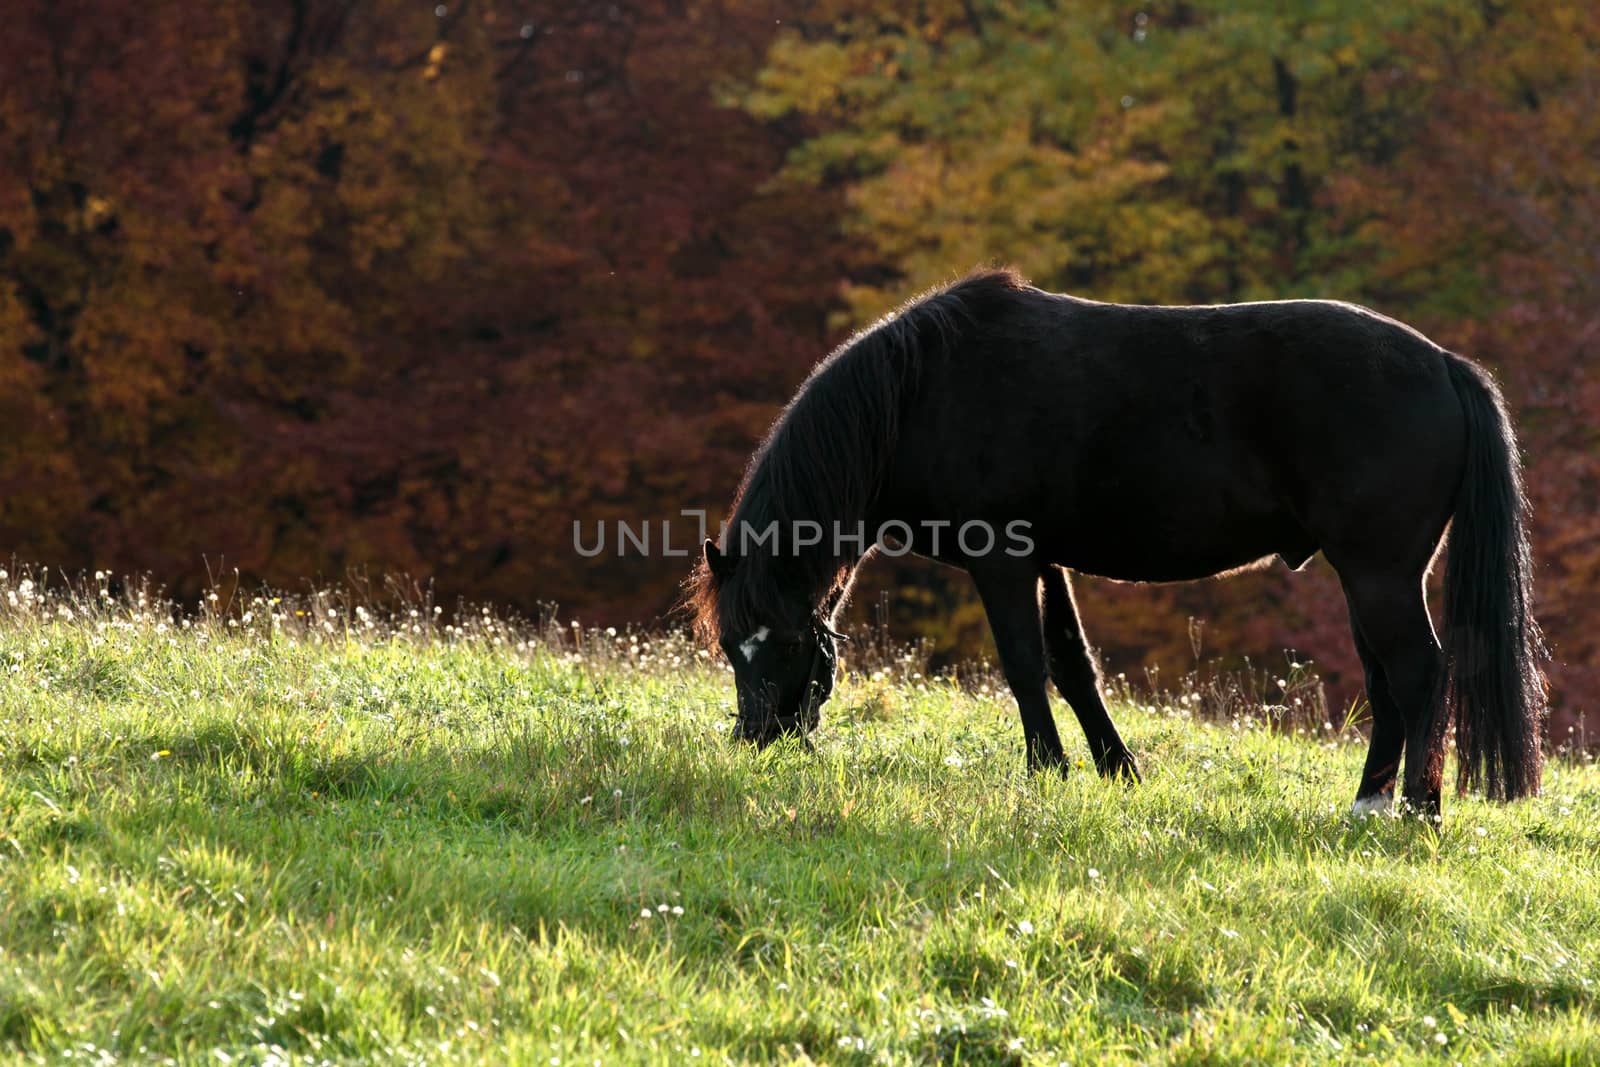 Ravnsholt Skov forest in  Alleroed - Denmark in autumn and a horse